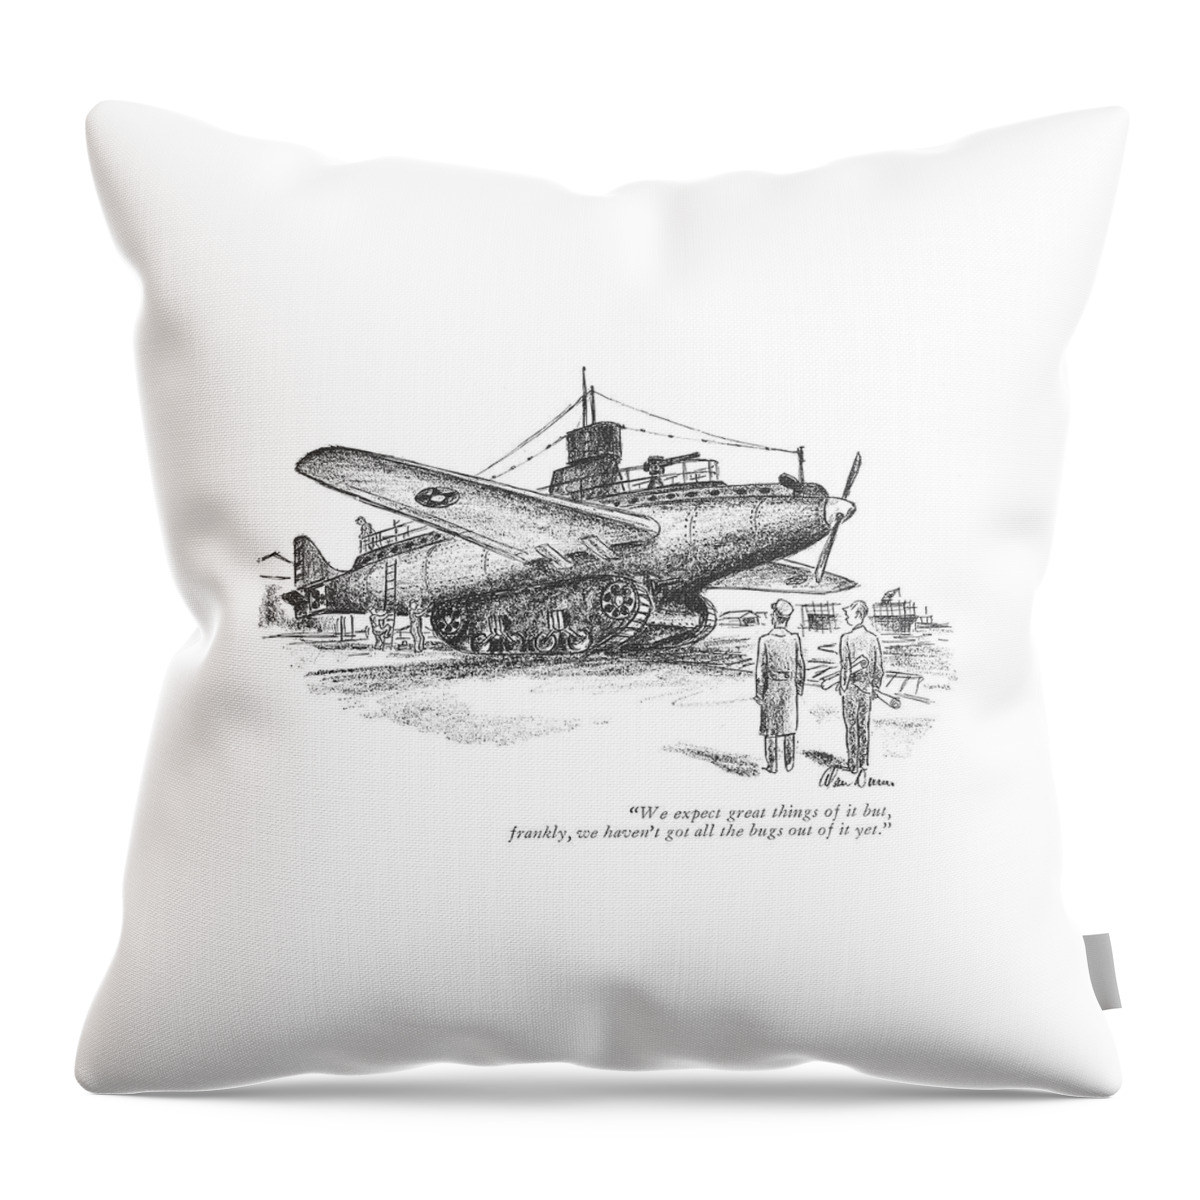 We Expect Great Things Of It But Throw Pillow